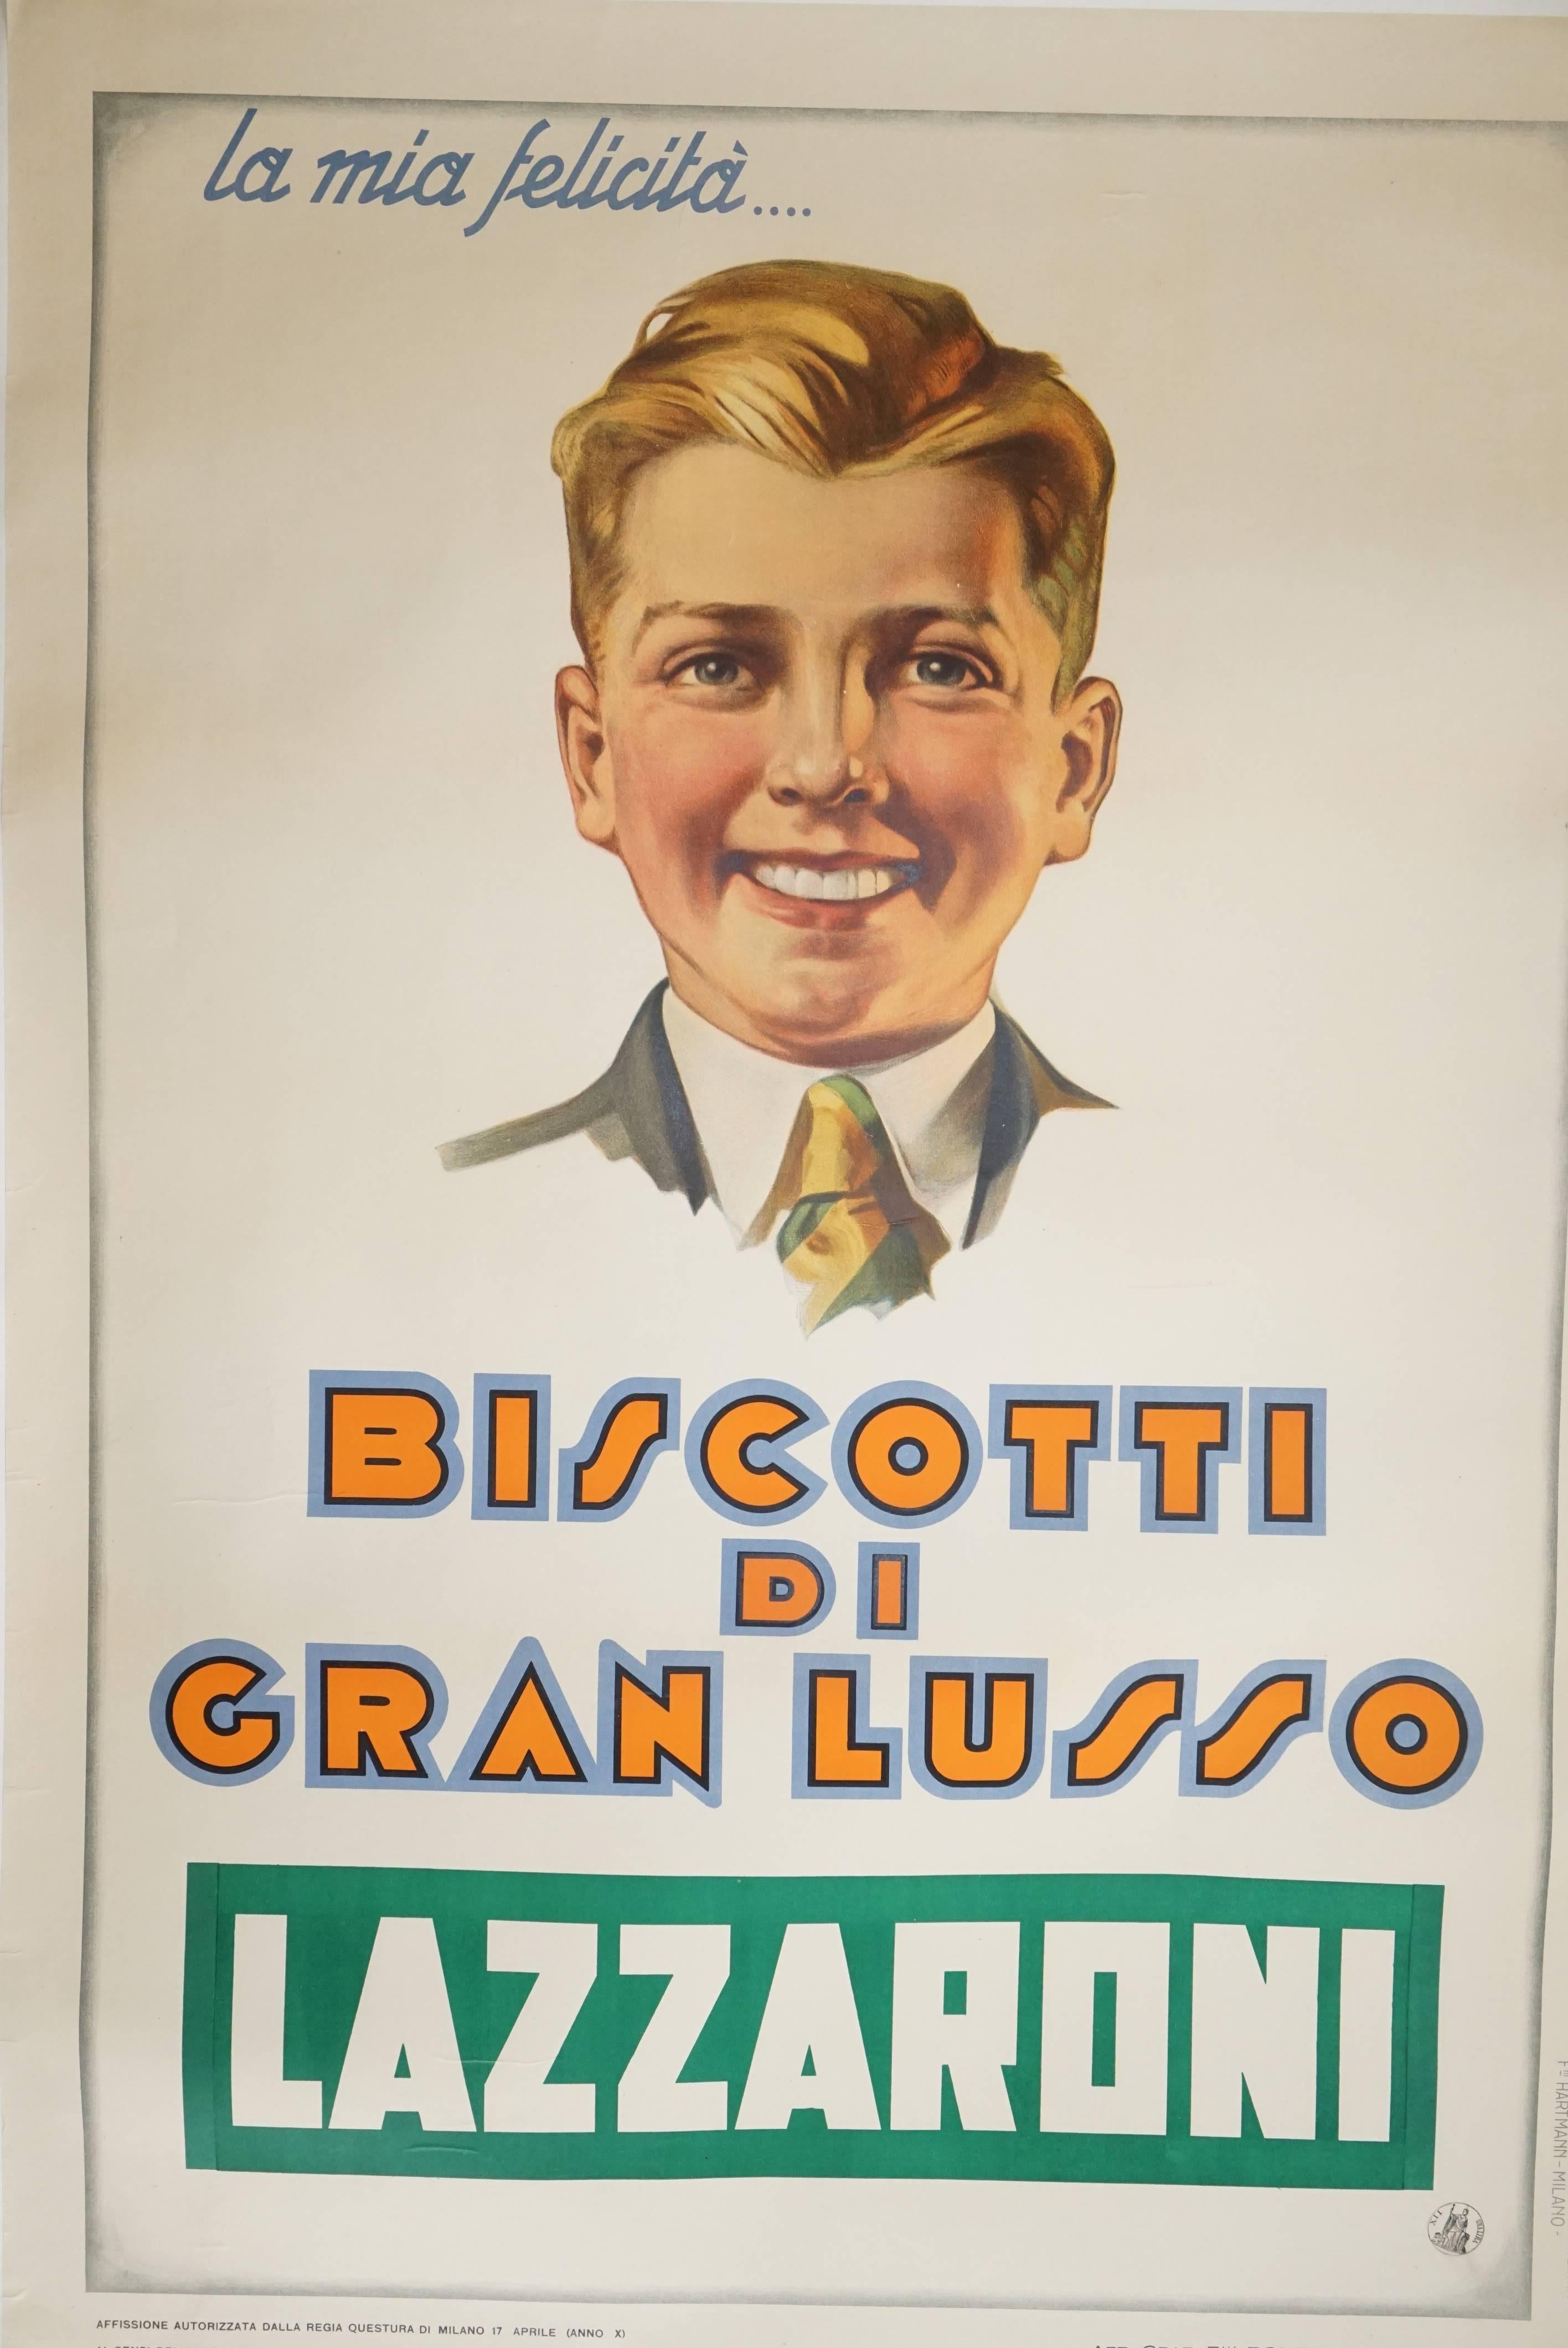 Large, graphic and colorful poster for Lazzaroni Biscotti.
Printed in Milan in 1921.